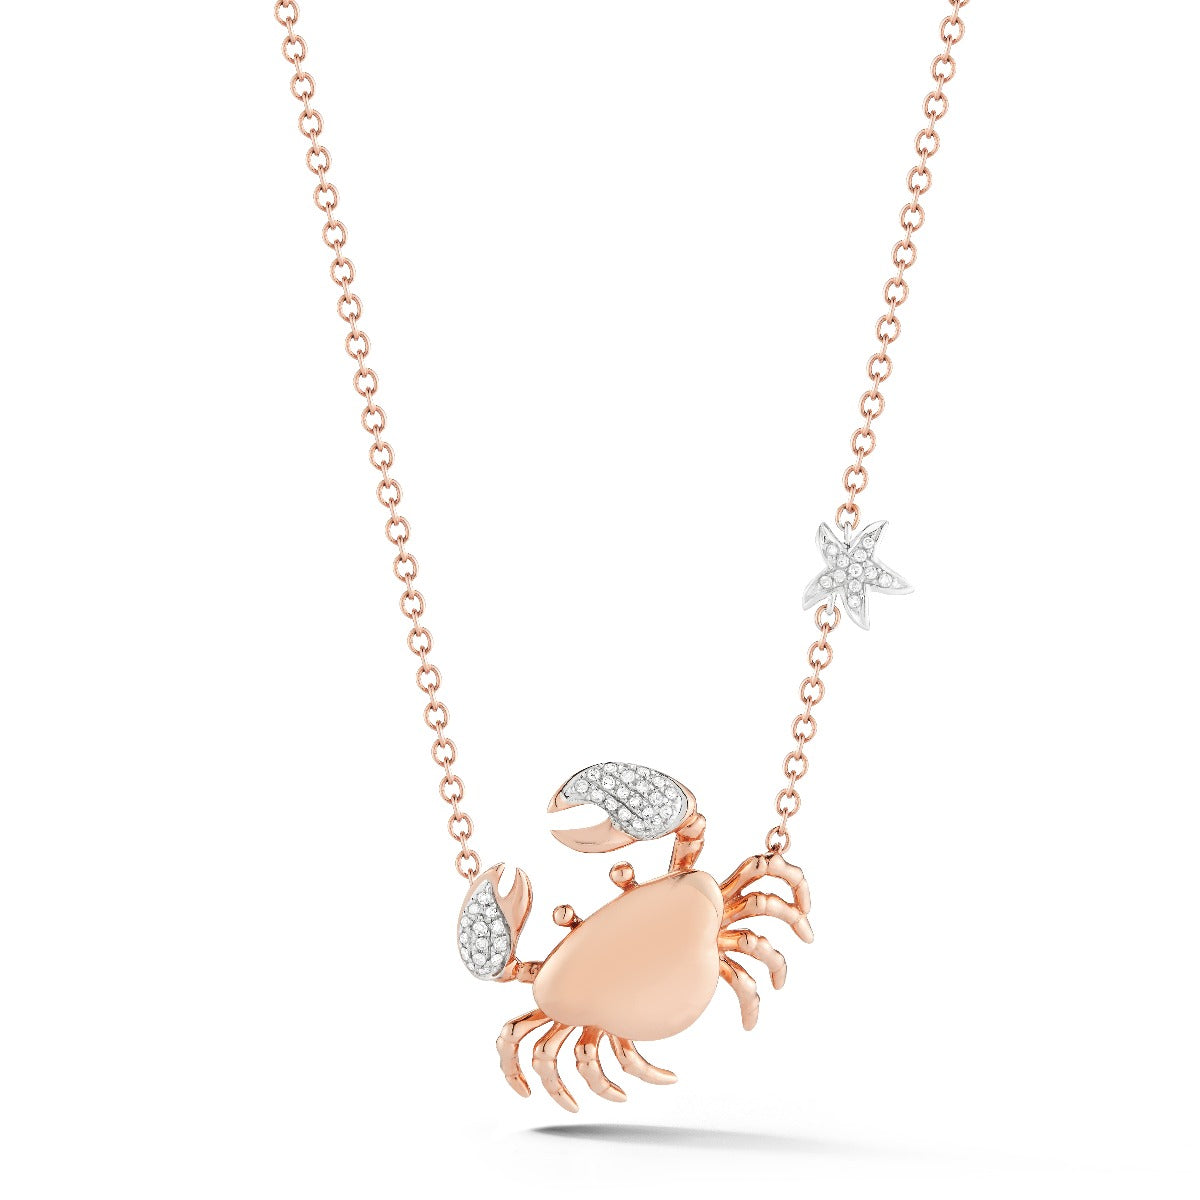 14K CRAB PENDANT WITH 44 DIAMONDS 0.15CT AND SMALL STAR DETAIL, 1/2" DIAMETER ON 18 INCHES CABLE CHAIN